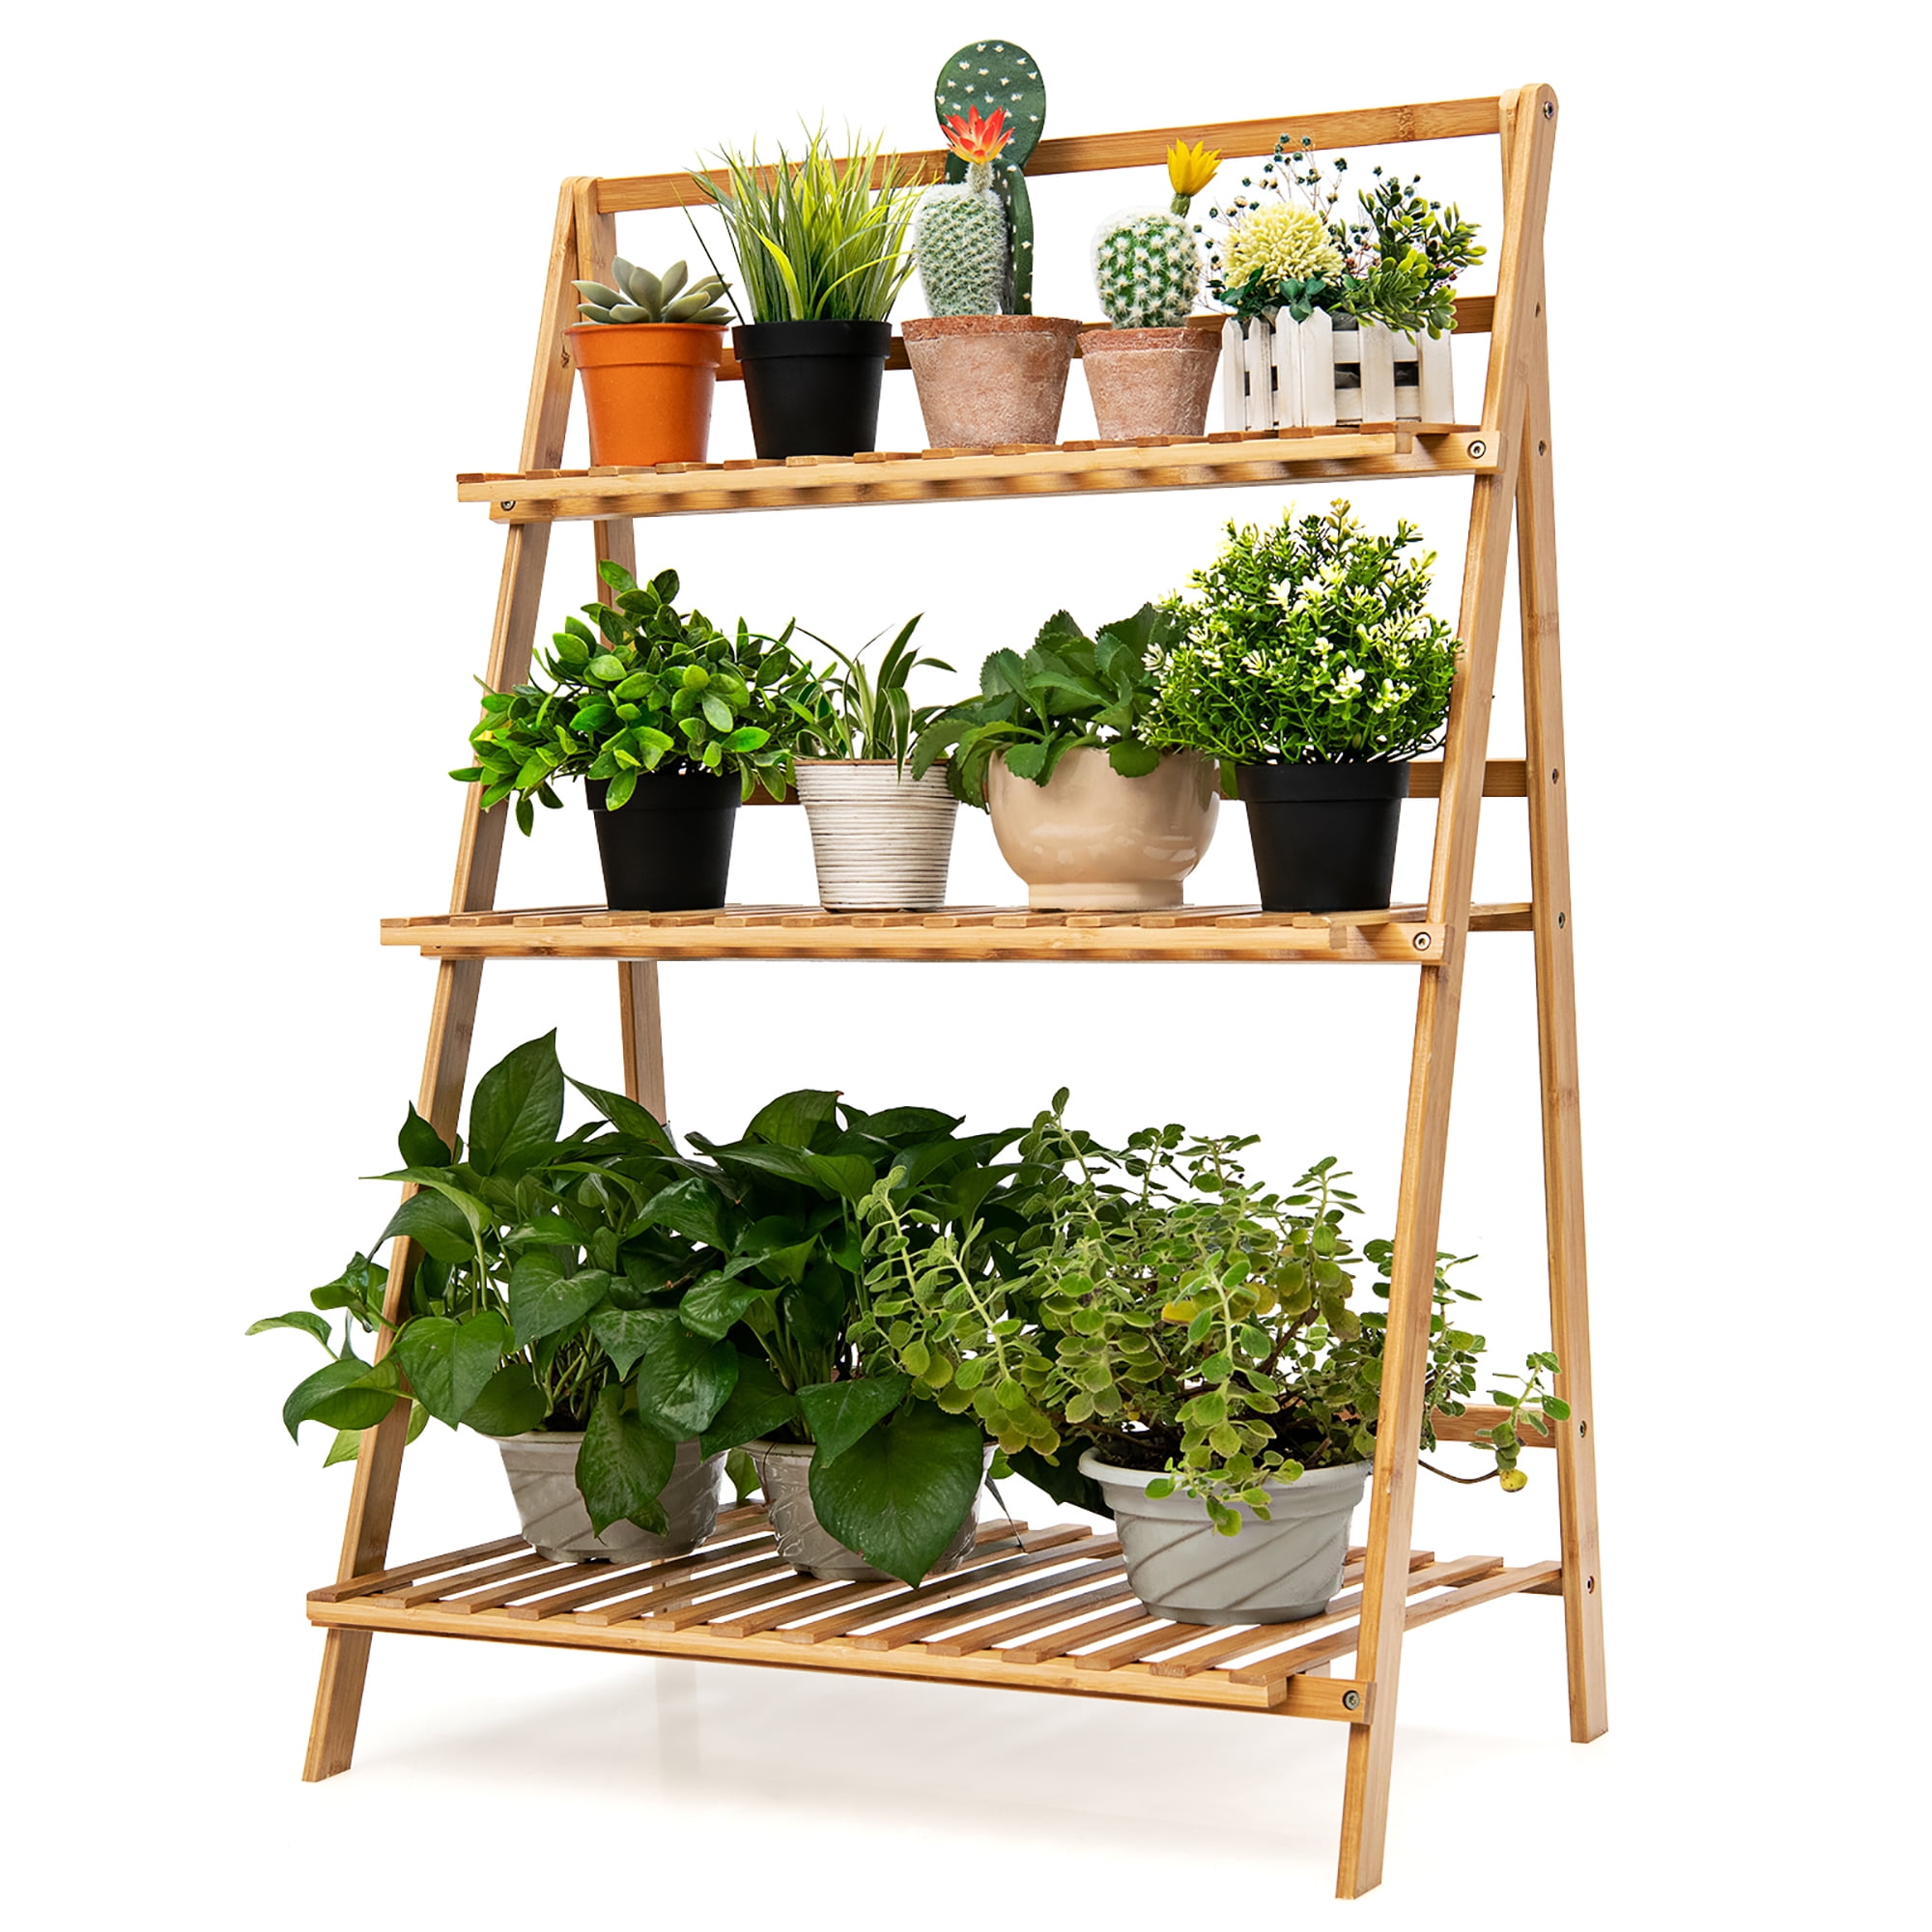 Details about   4 Tiers Bamboo Flower Pot Plant Stand Ladder Shelf Display Rack Indoor Outdoor 